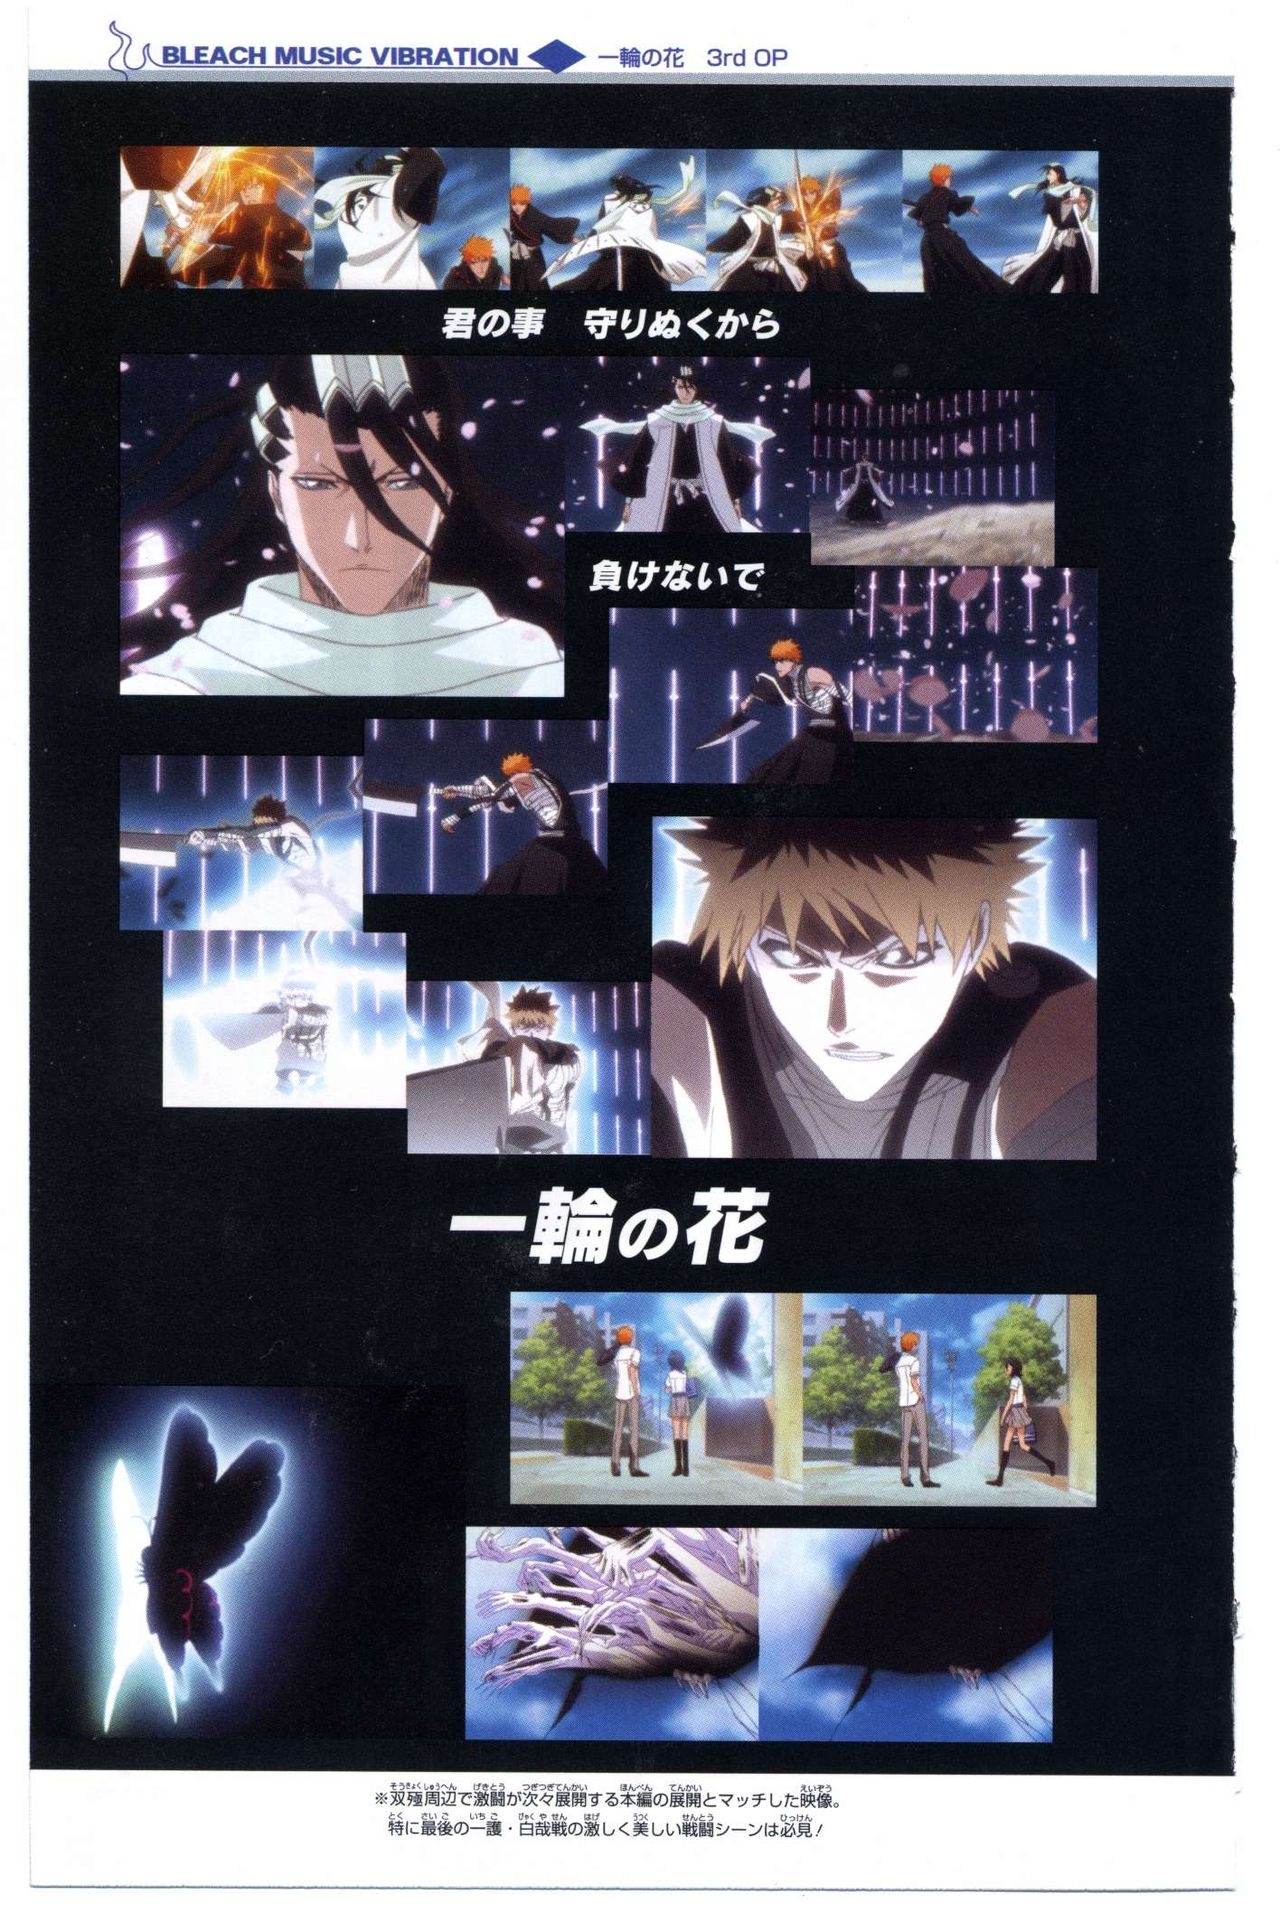 Bleach: Official Animation Book VIBEs 171